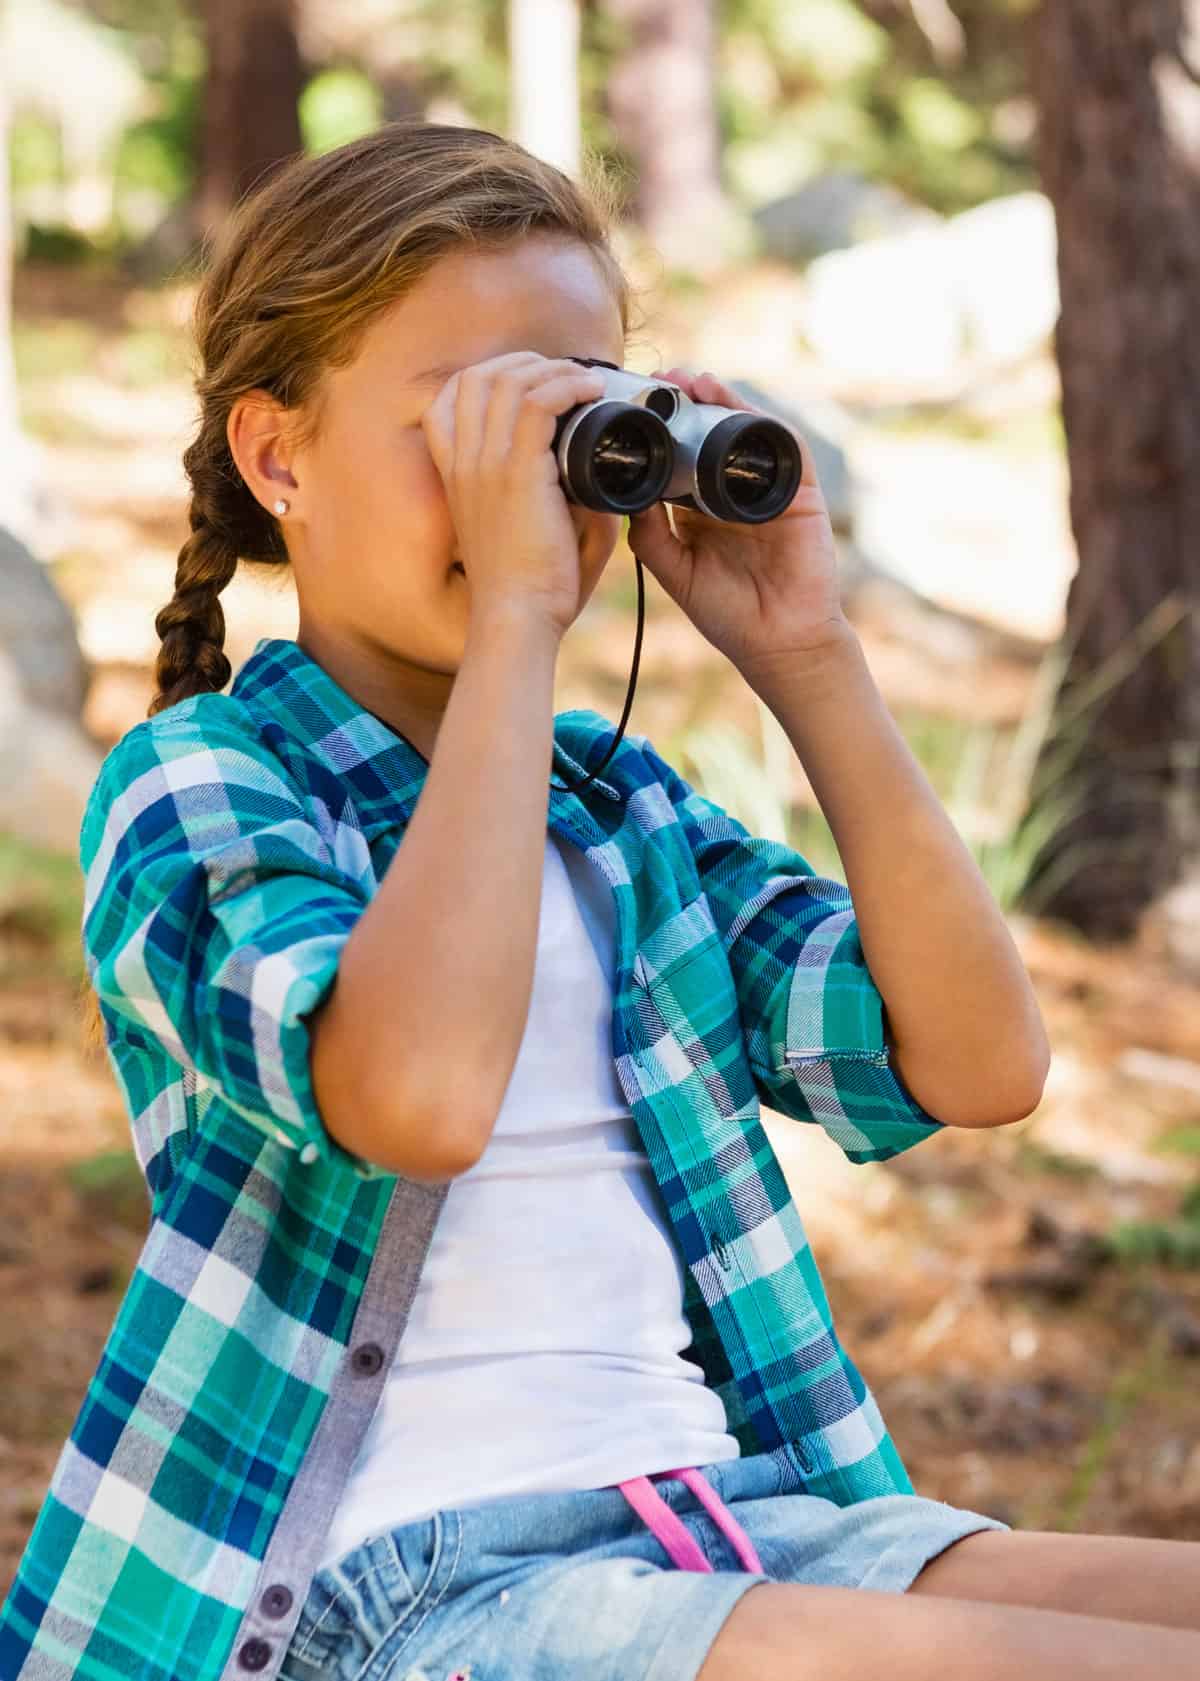 Best rated compact binoculars for kids